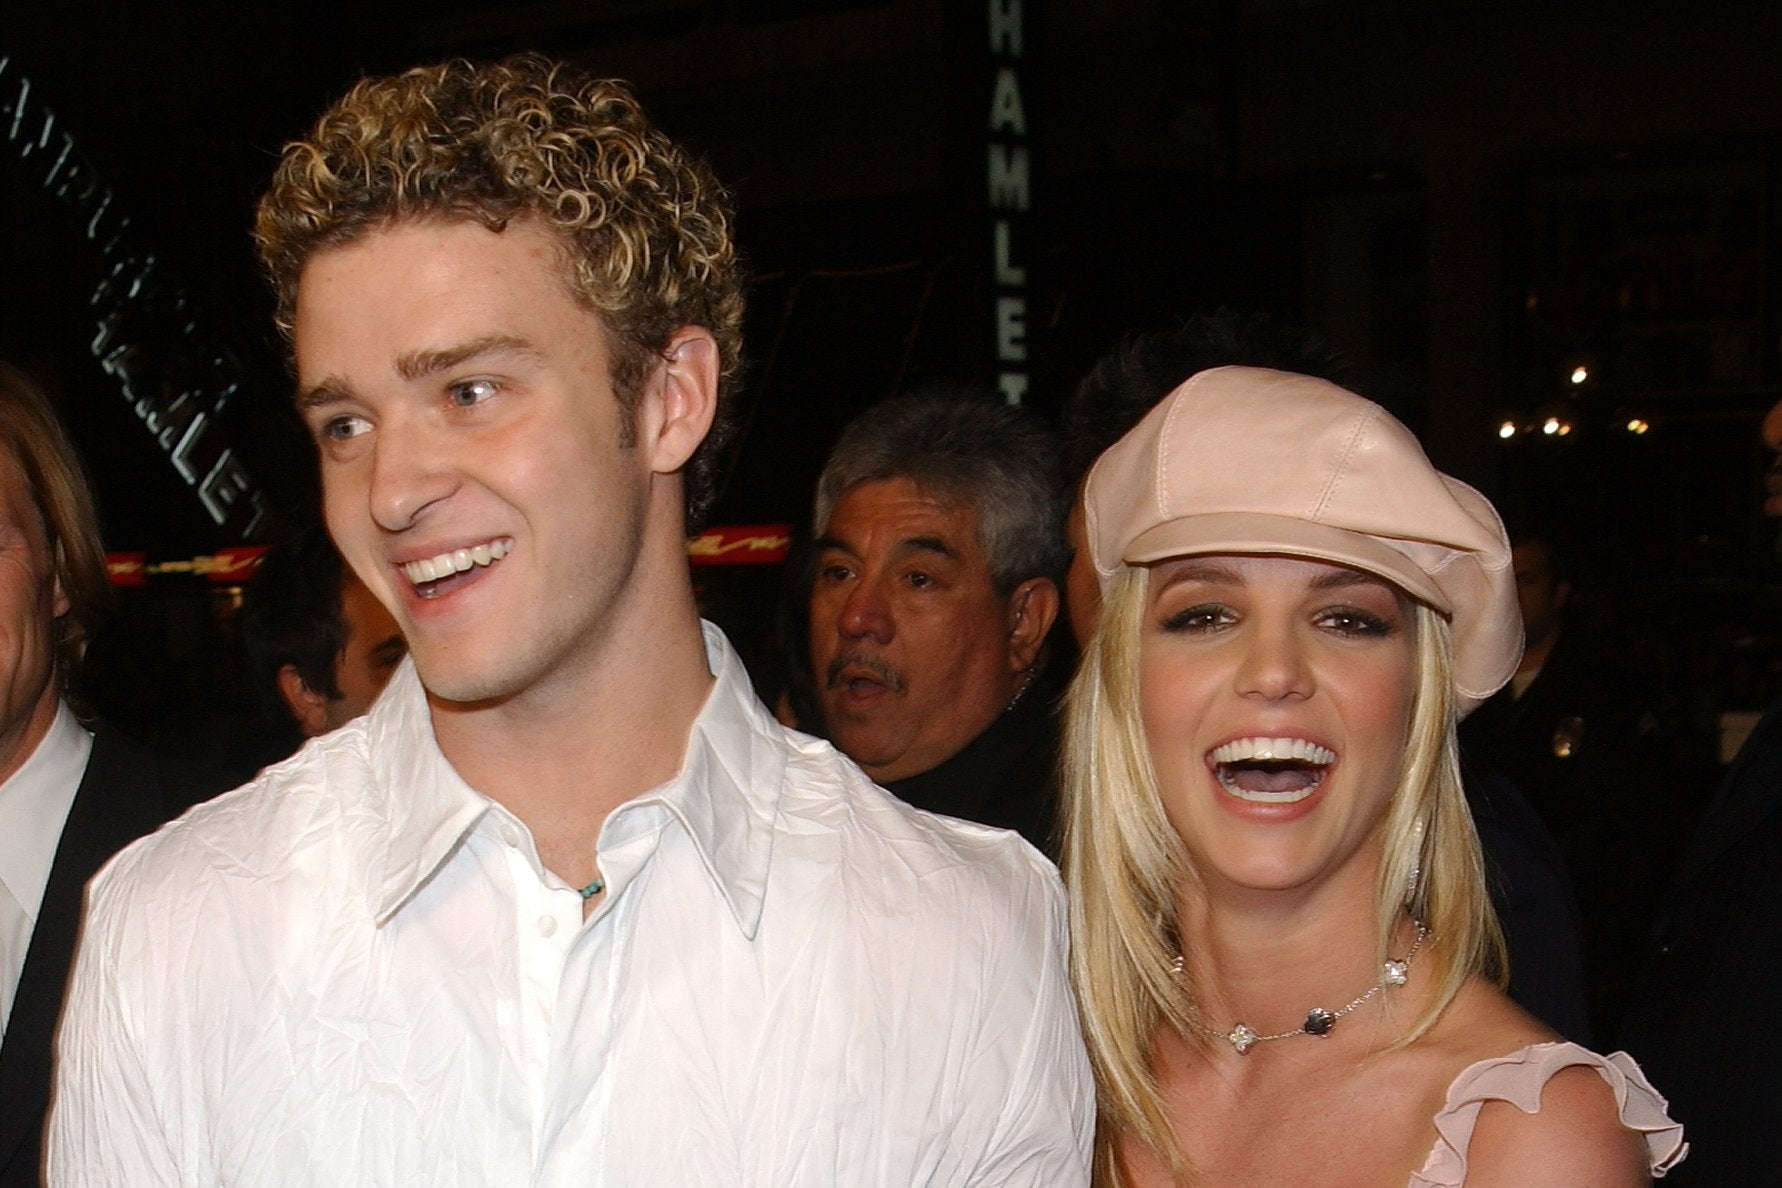 Justin Timberlake and Britney Spears in 2002